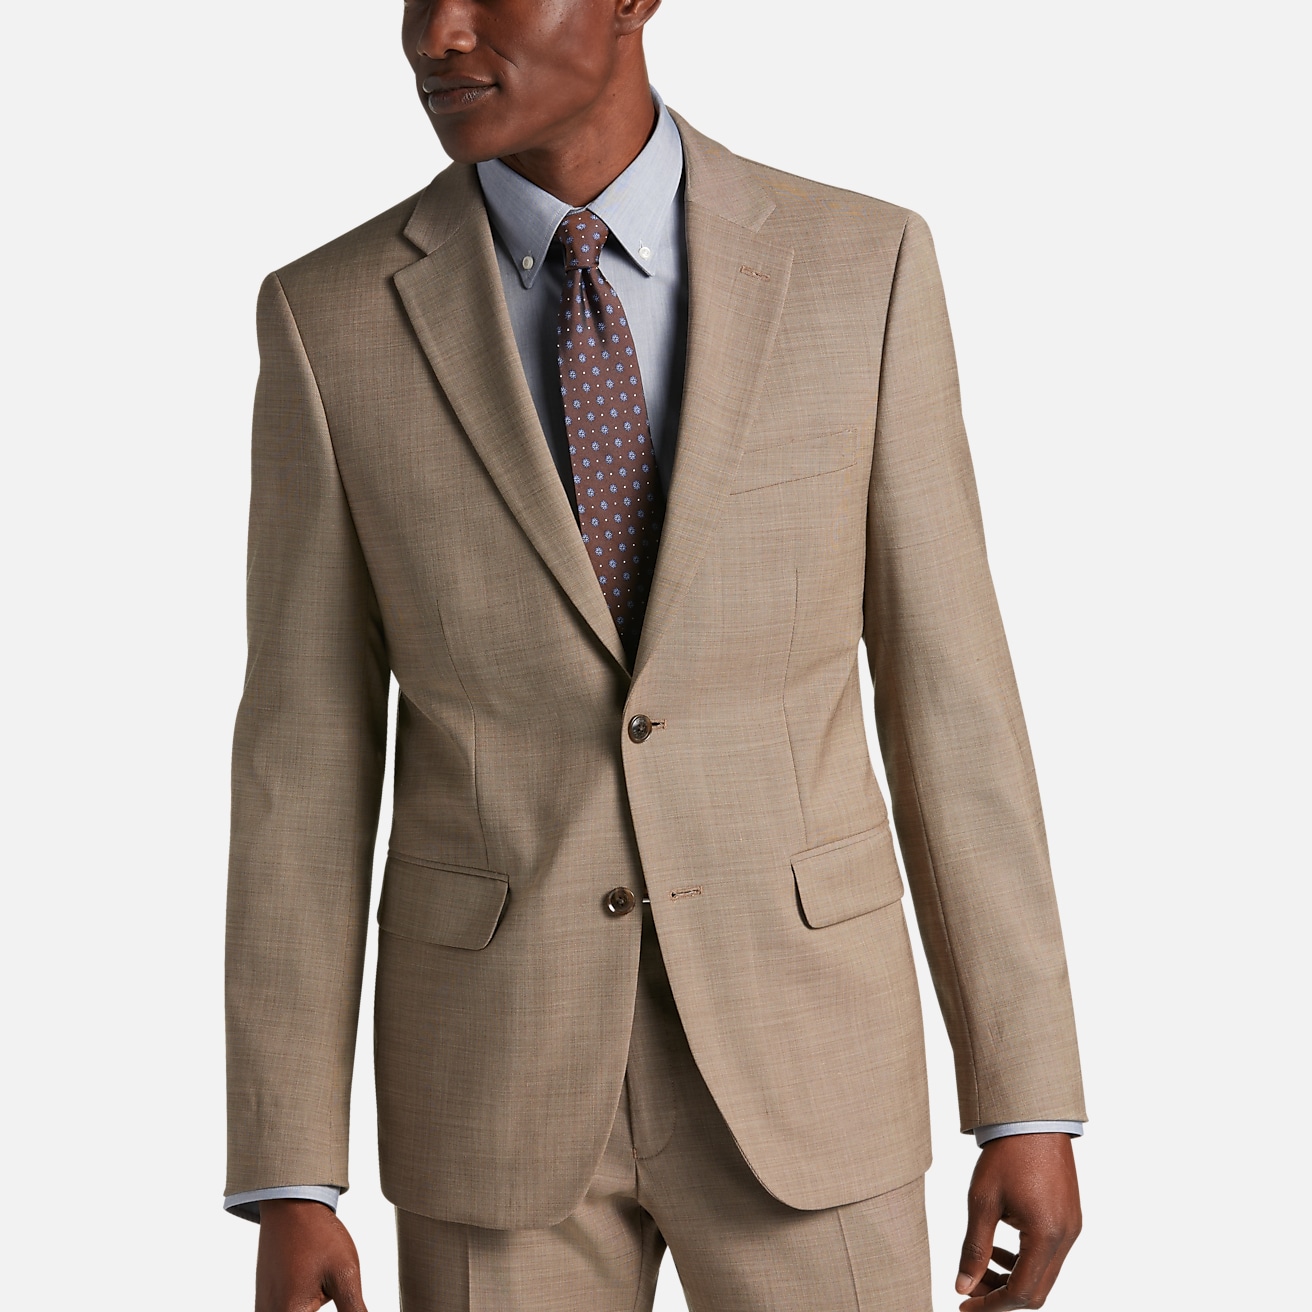 This Tommy Hilfiger Suit Has All The Comfort and Style You Could